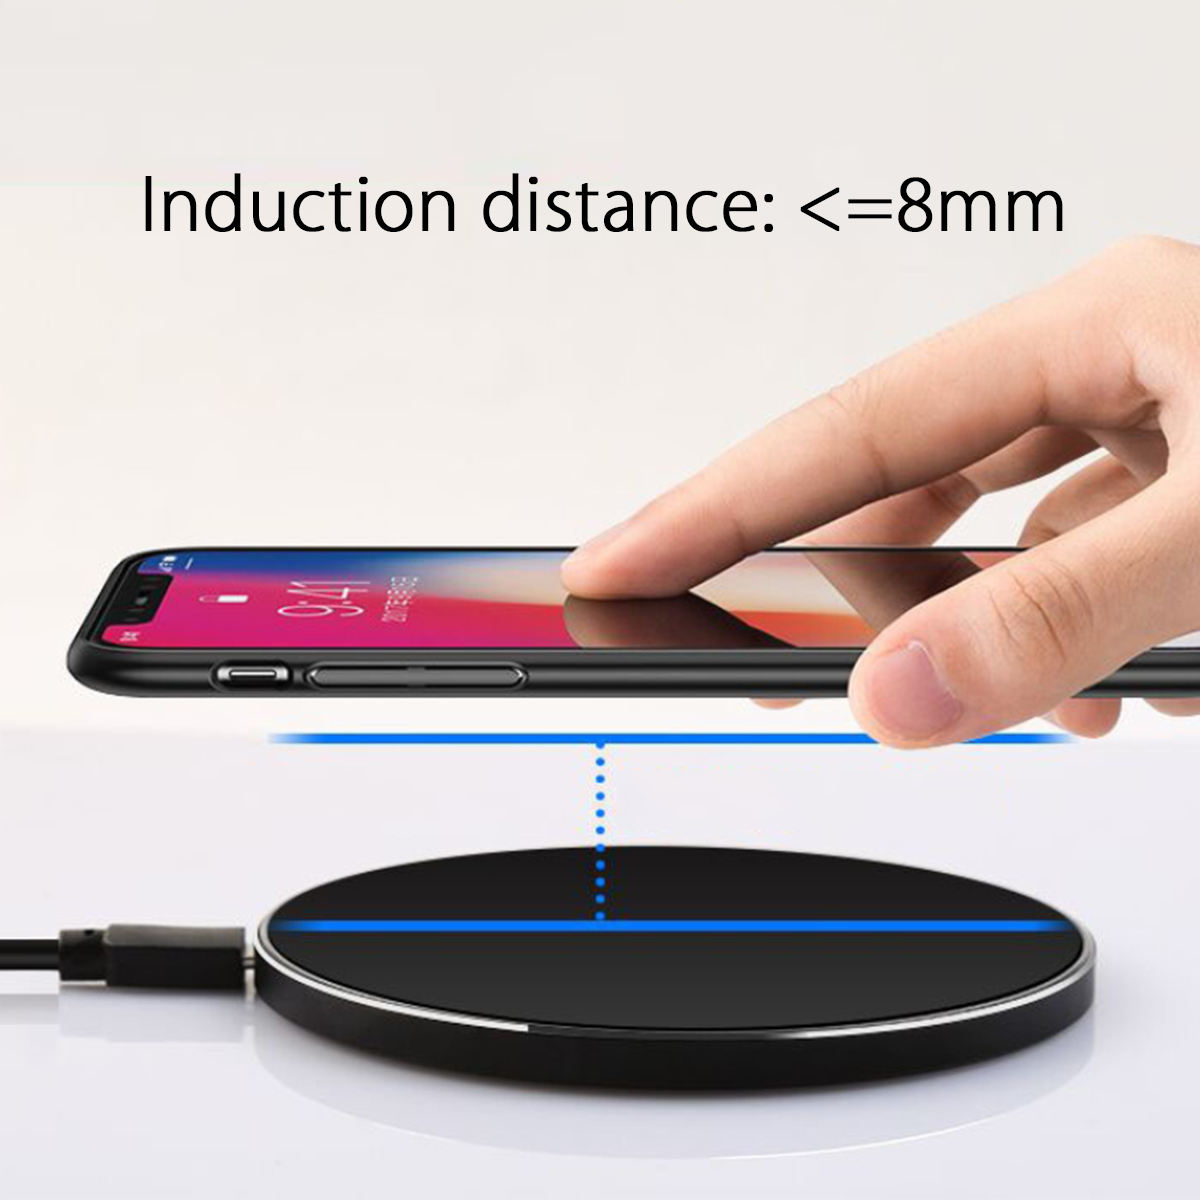 Bakeey-Aluminum-QI-Wireless-Fast-Charger-Charging-Dock-Pad-Mat-Phone-For-iPhone-XS-XR-X-1366096-3